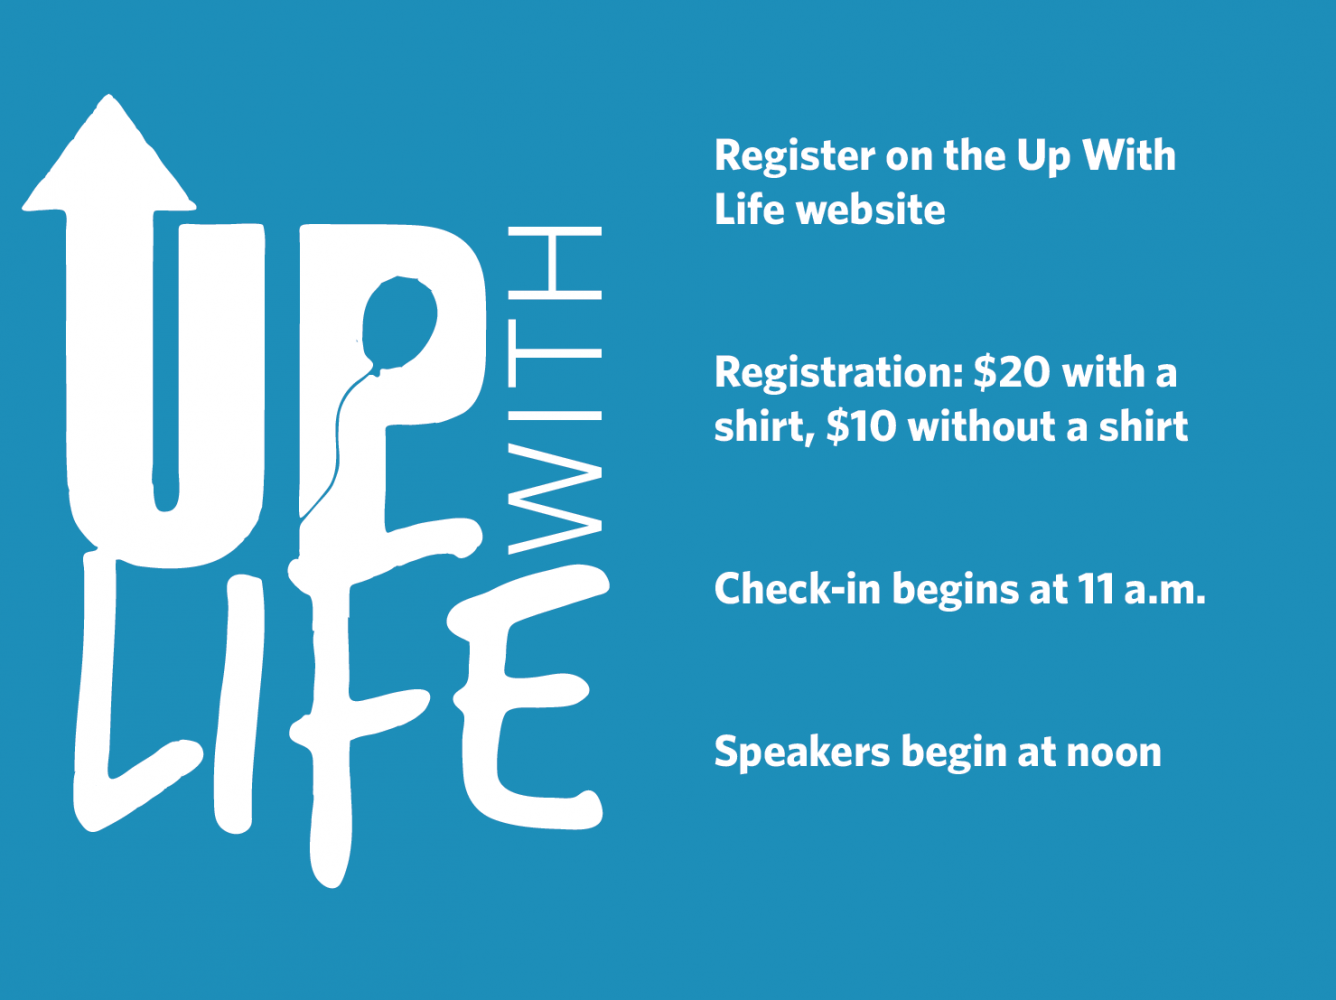 Up With Life Walk aims to spread suicide awareness, prevention